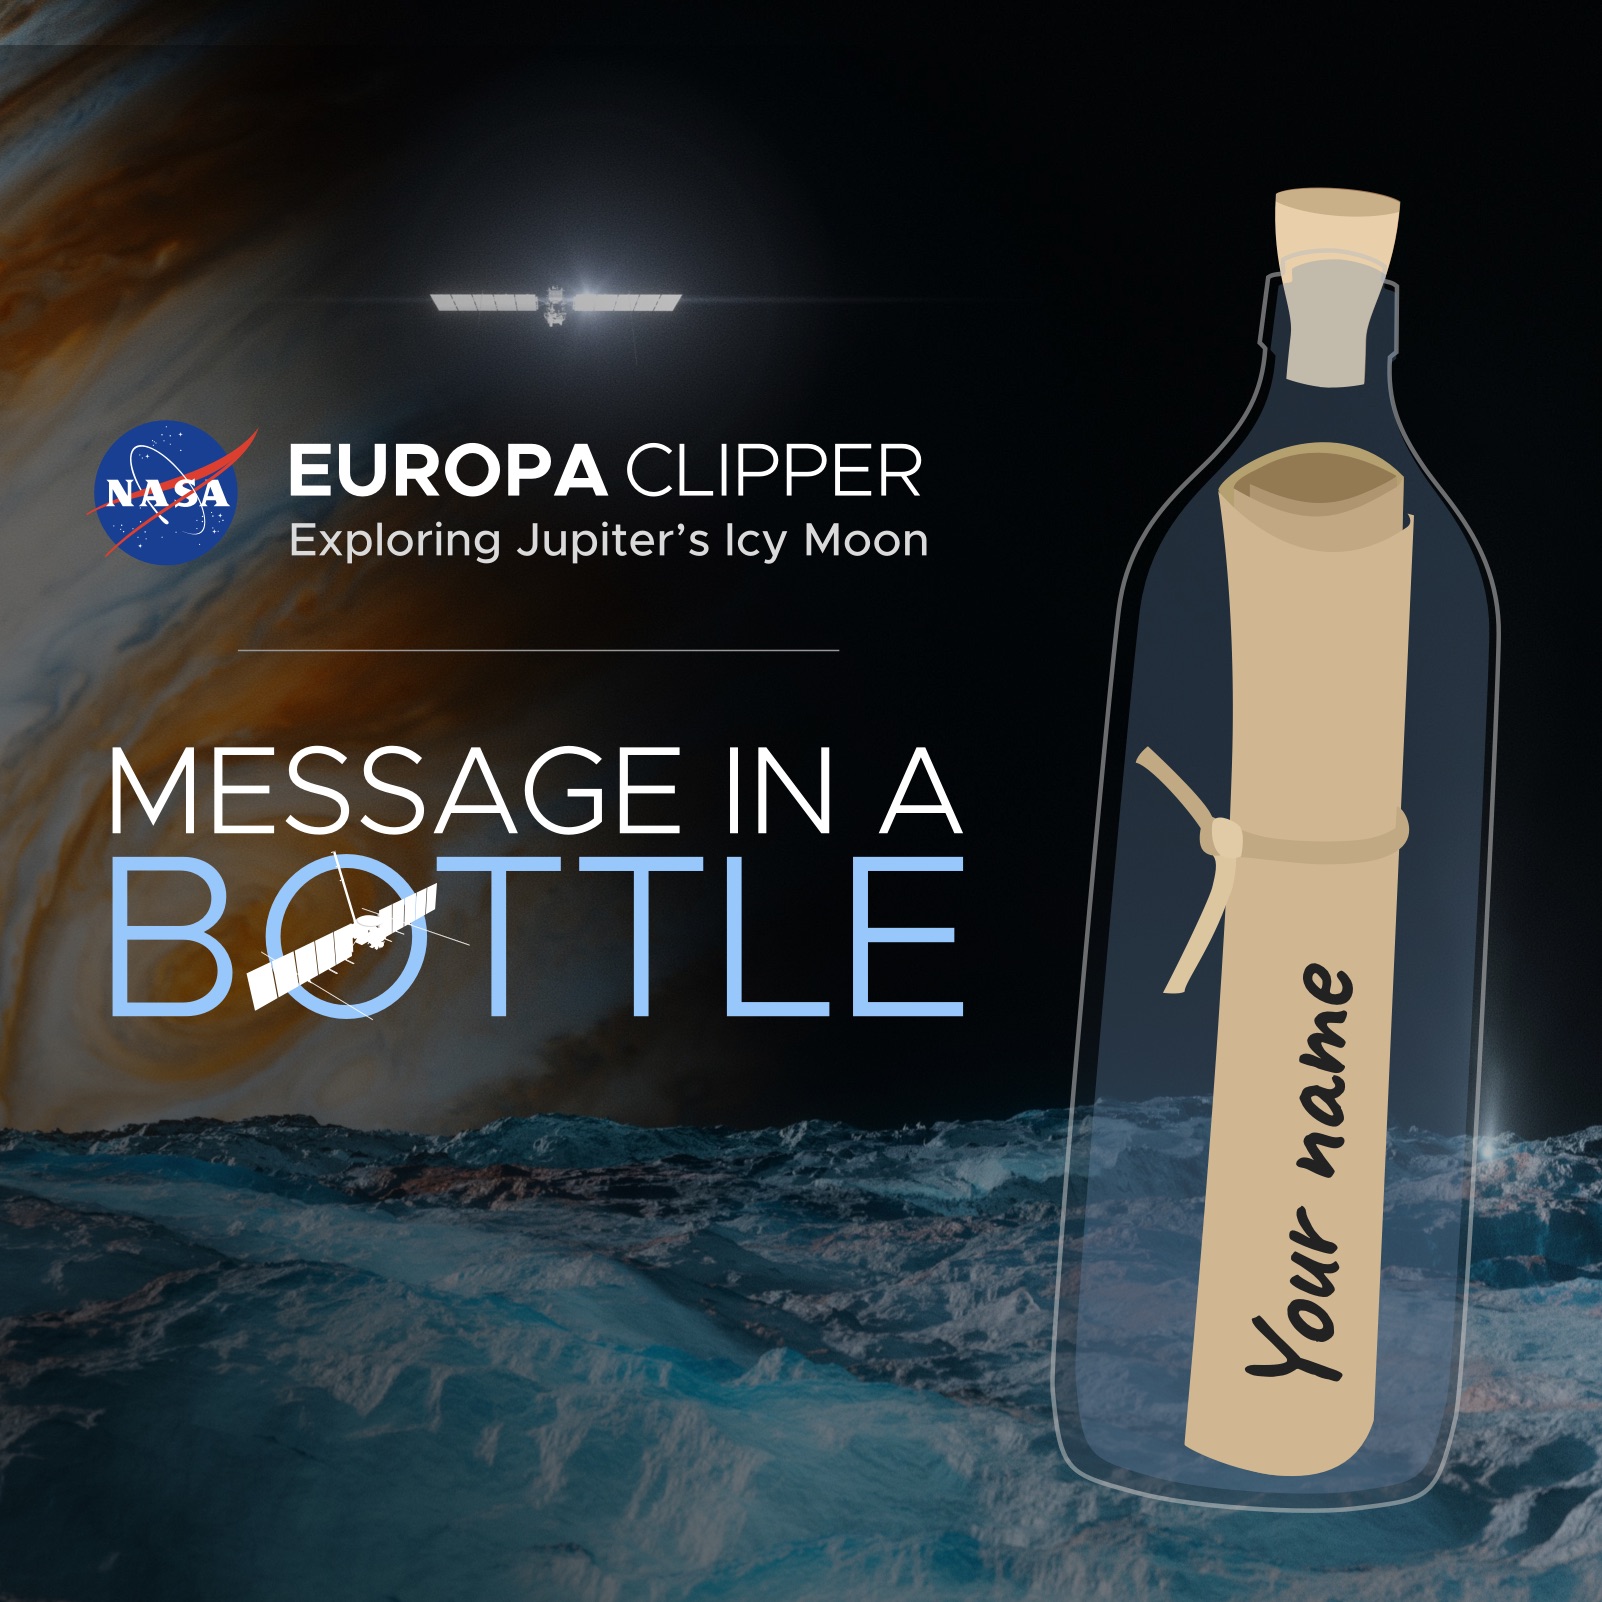 Sign Your Name to Europa Clipper's Message in a Bottle